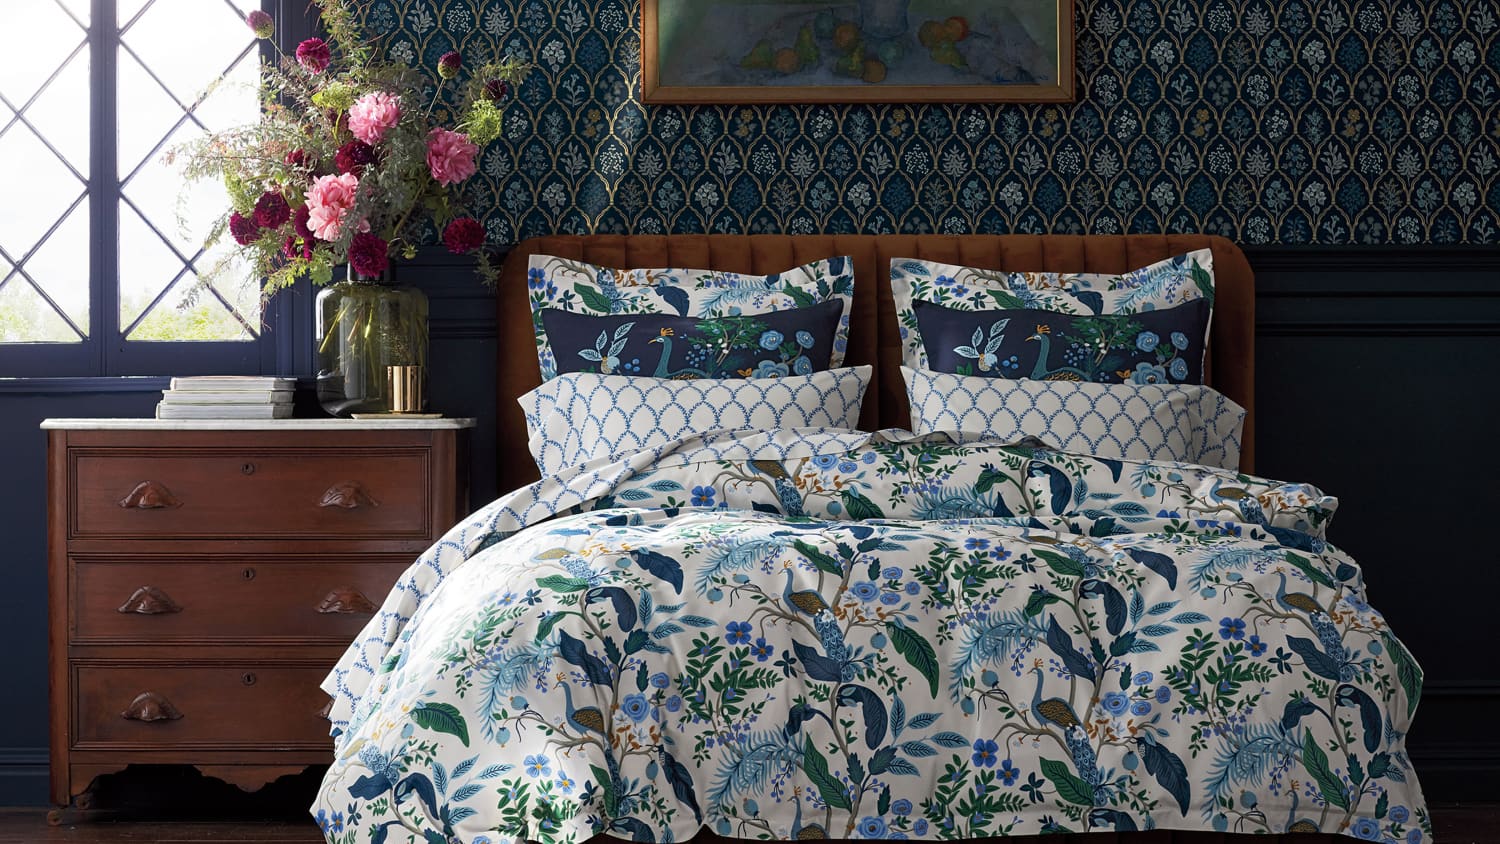 Rifle Paper Co. x The Company Store Just Dropped Cozy Floral Bedding